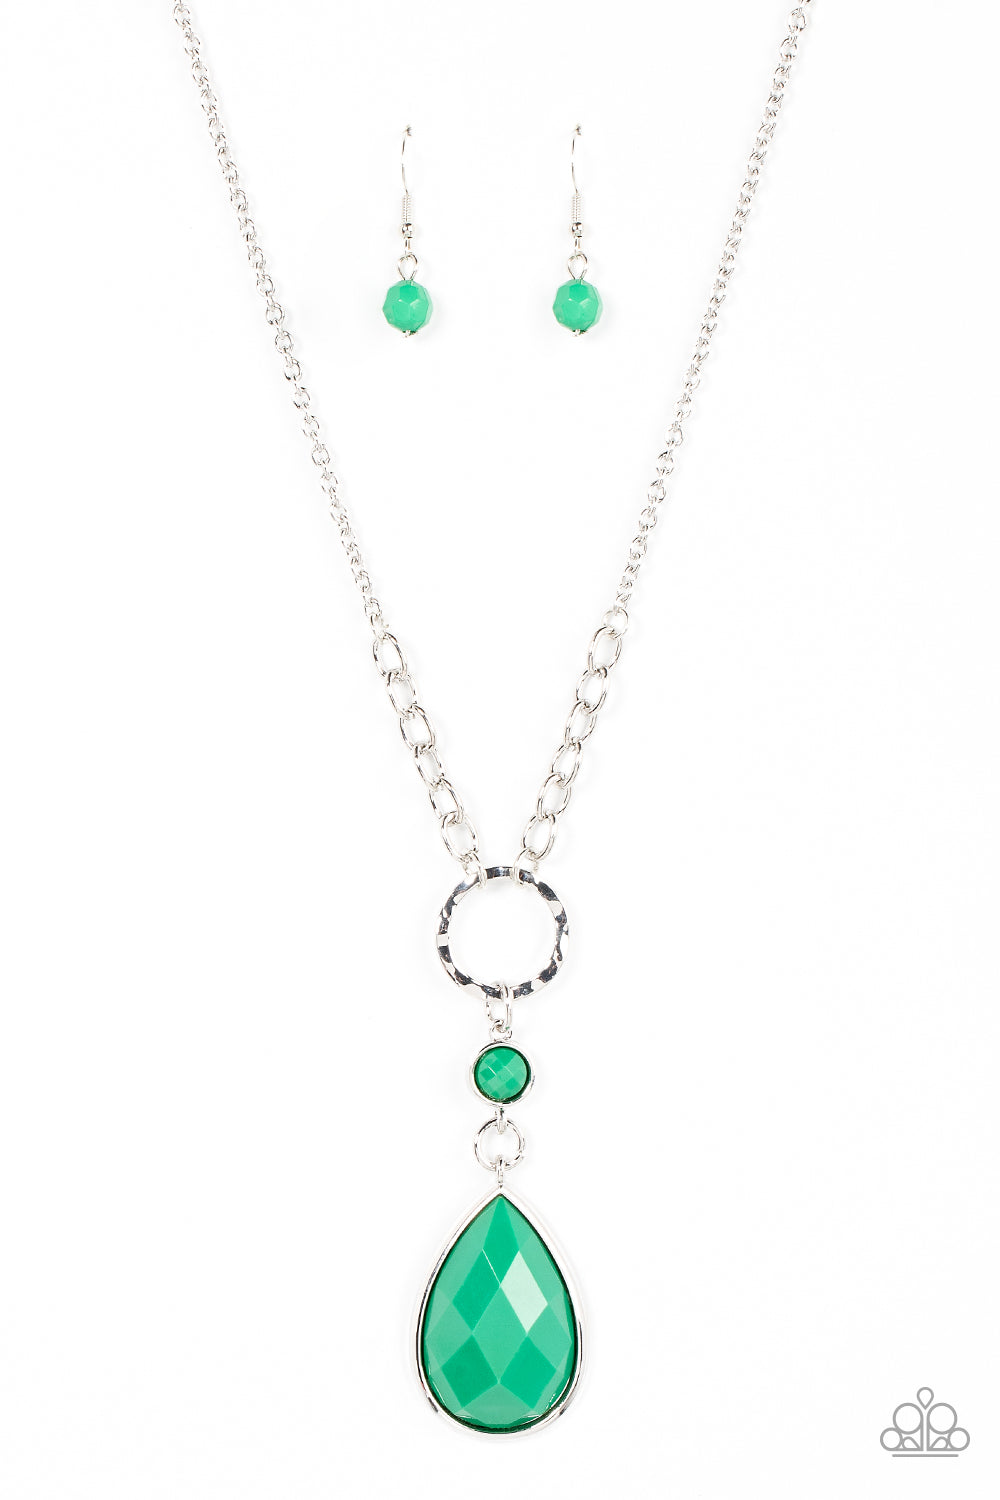 Paparazzi Necklace Valley Girl Glamour - Green